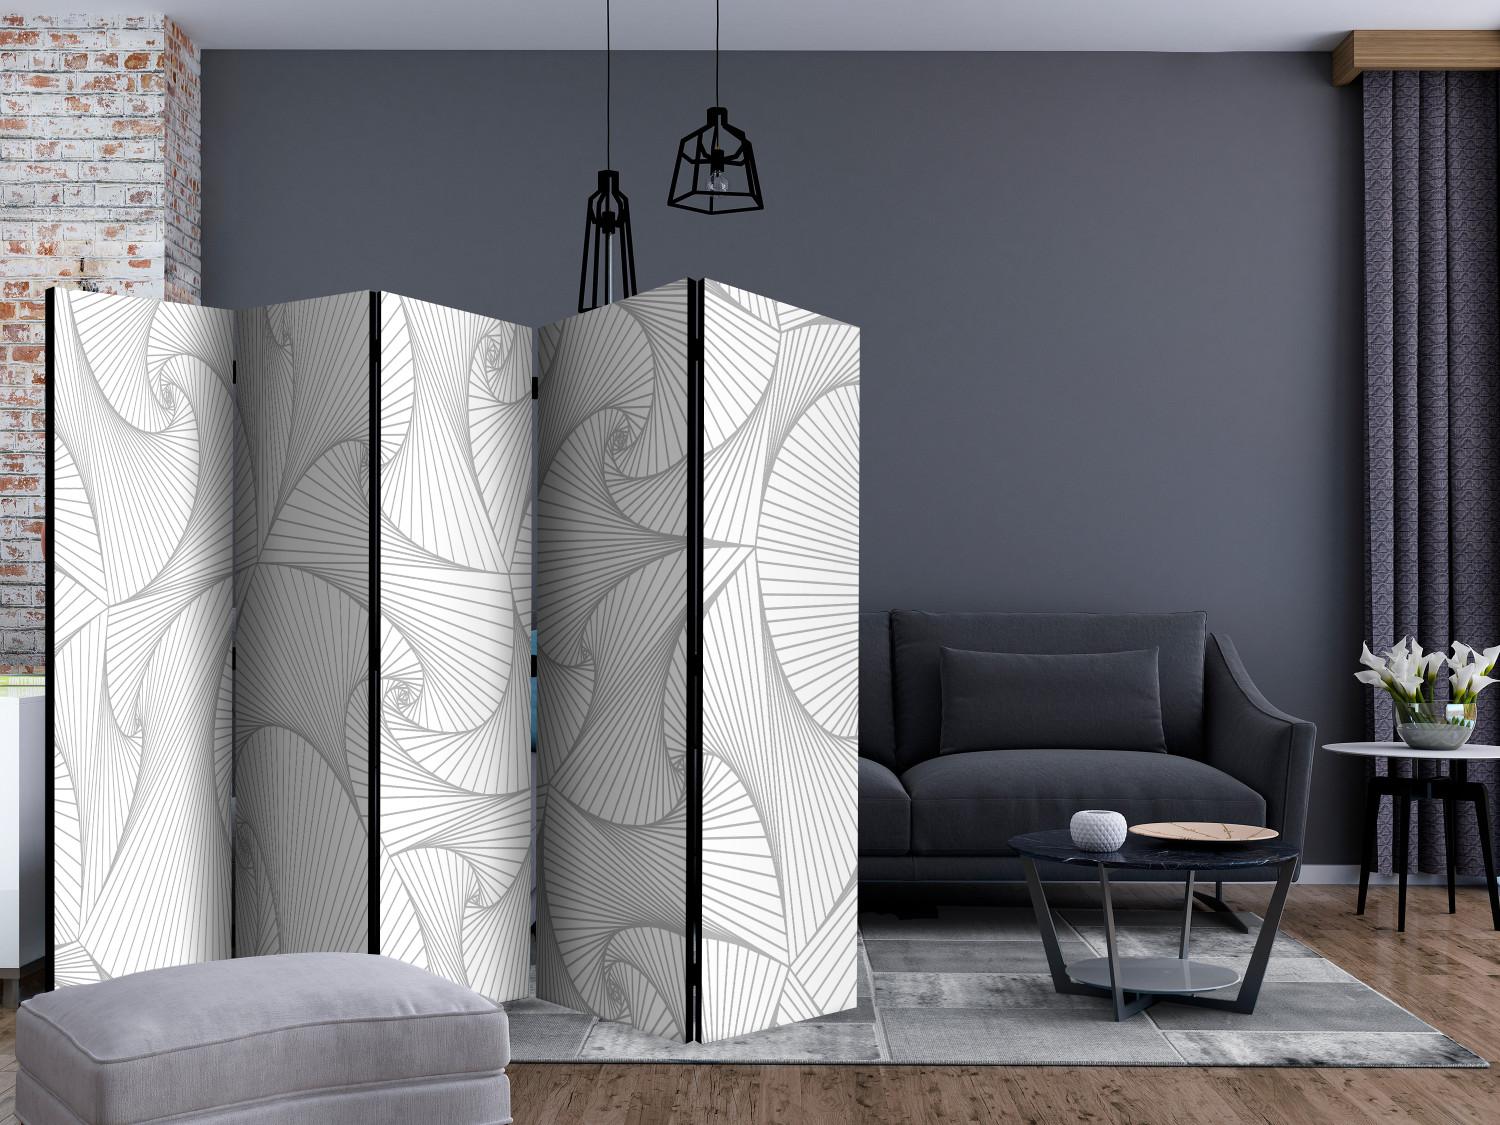 Room Divider Avant-Garde Fan II - abstract texture with gray patterns